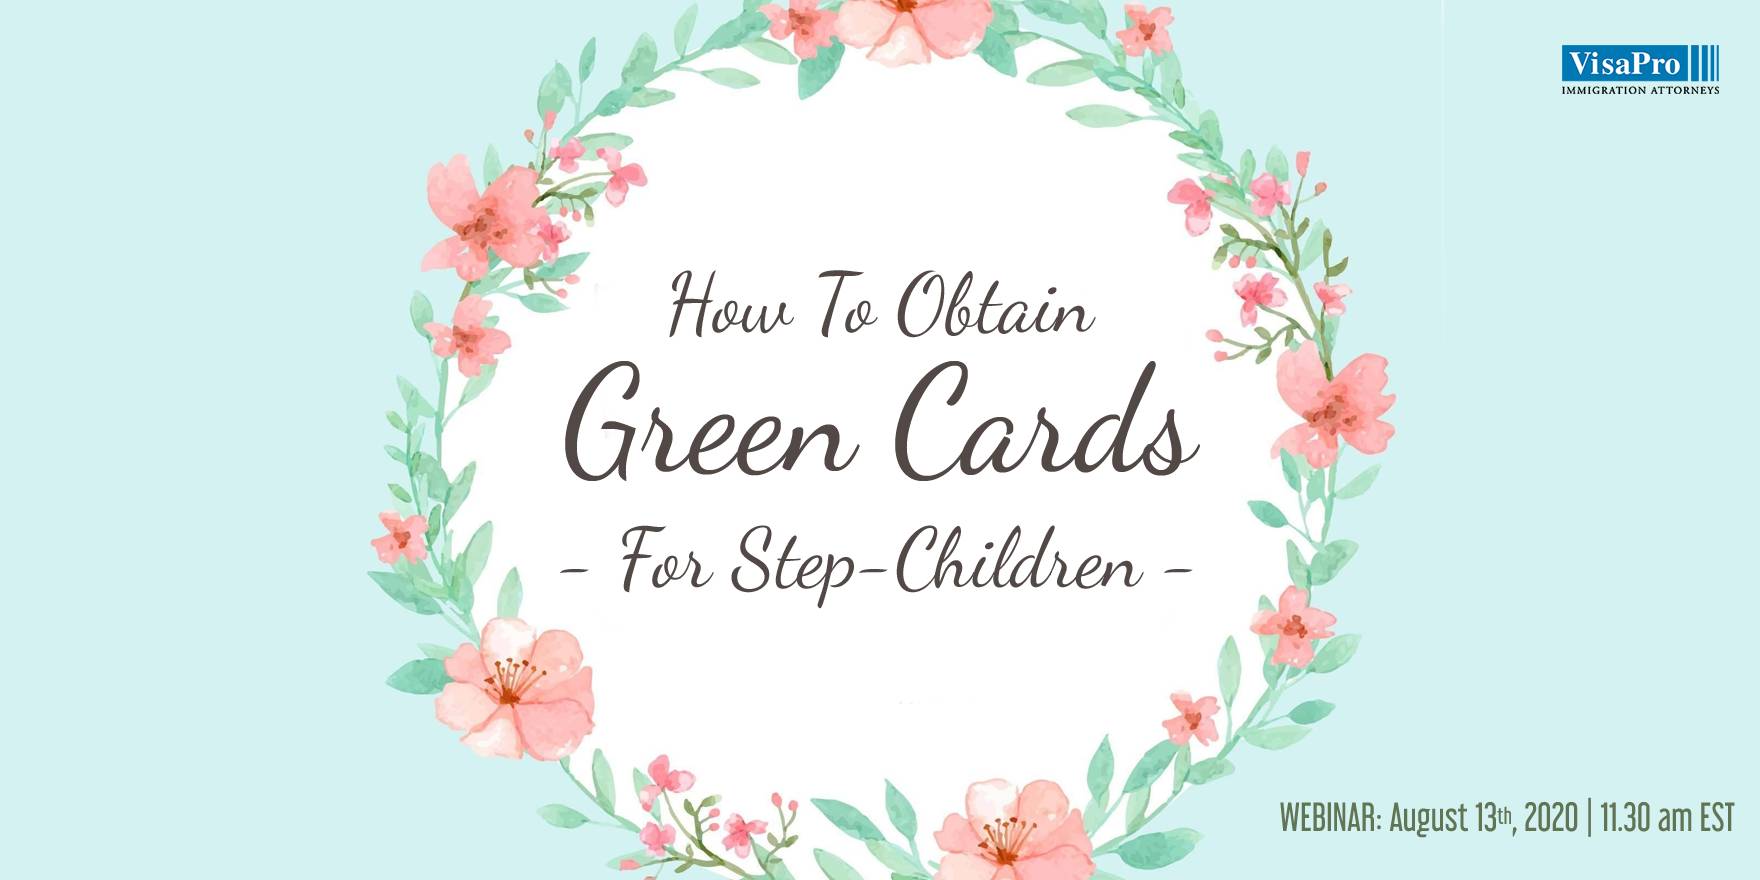 Immigration Seminar: How To Obtain Green Cards For Step-Children, Accra, Ghana